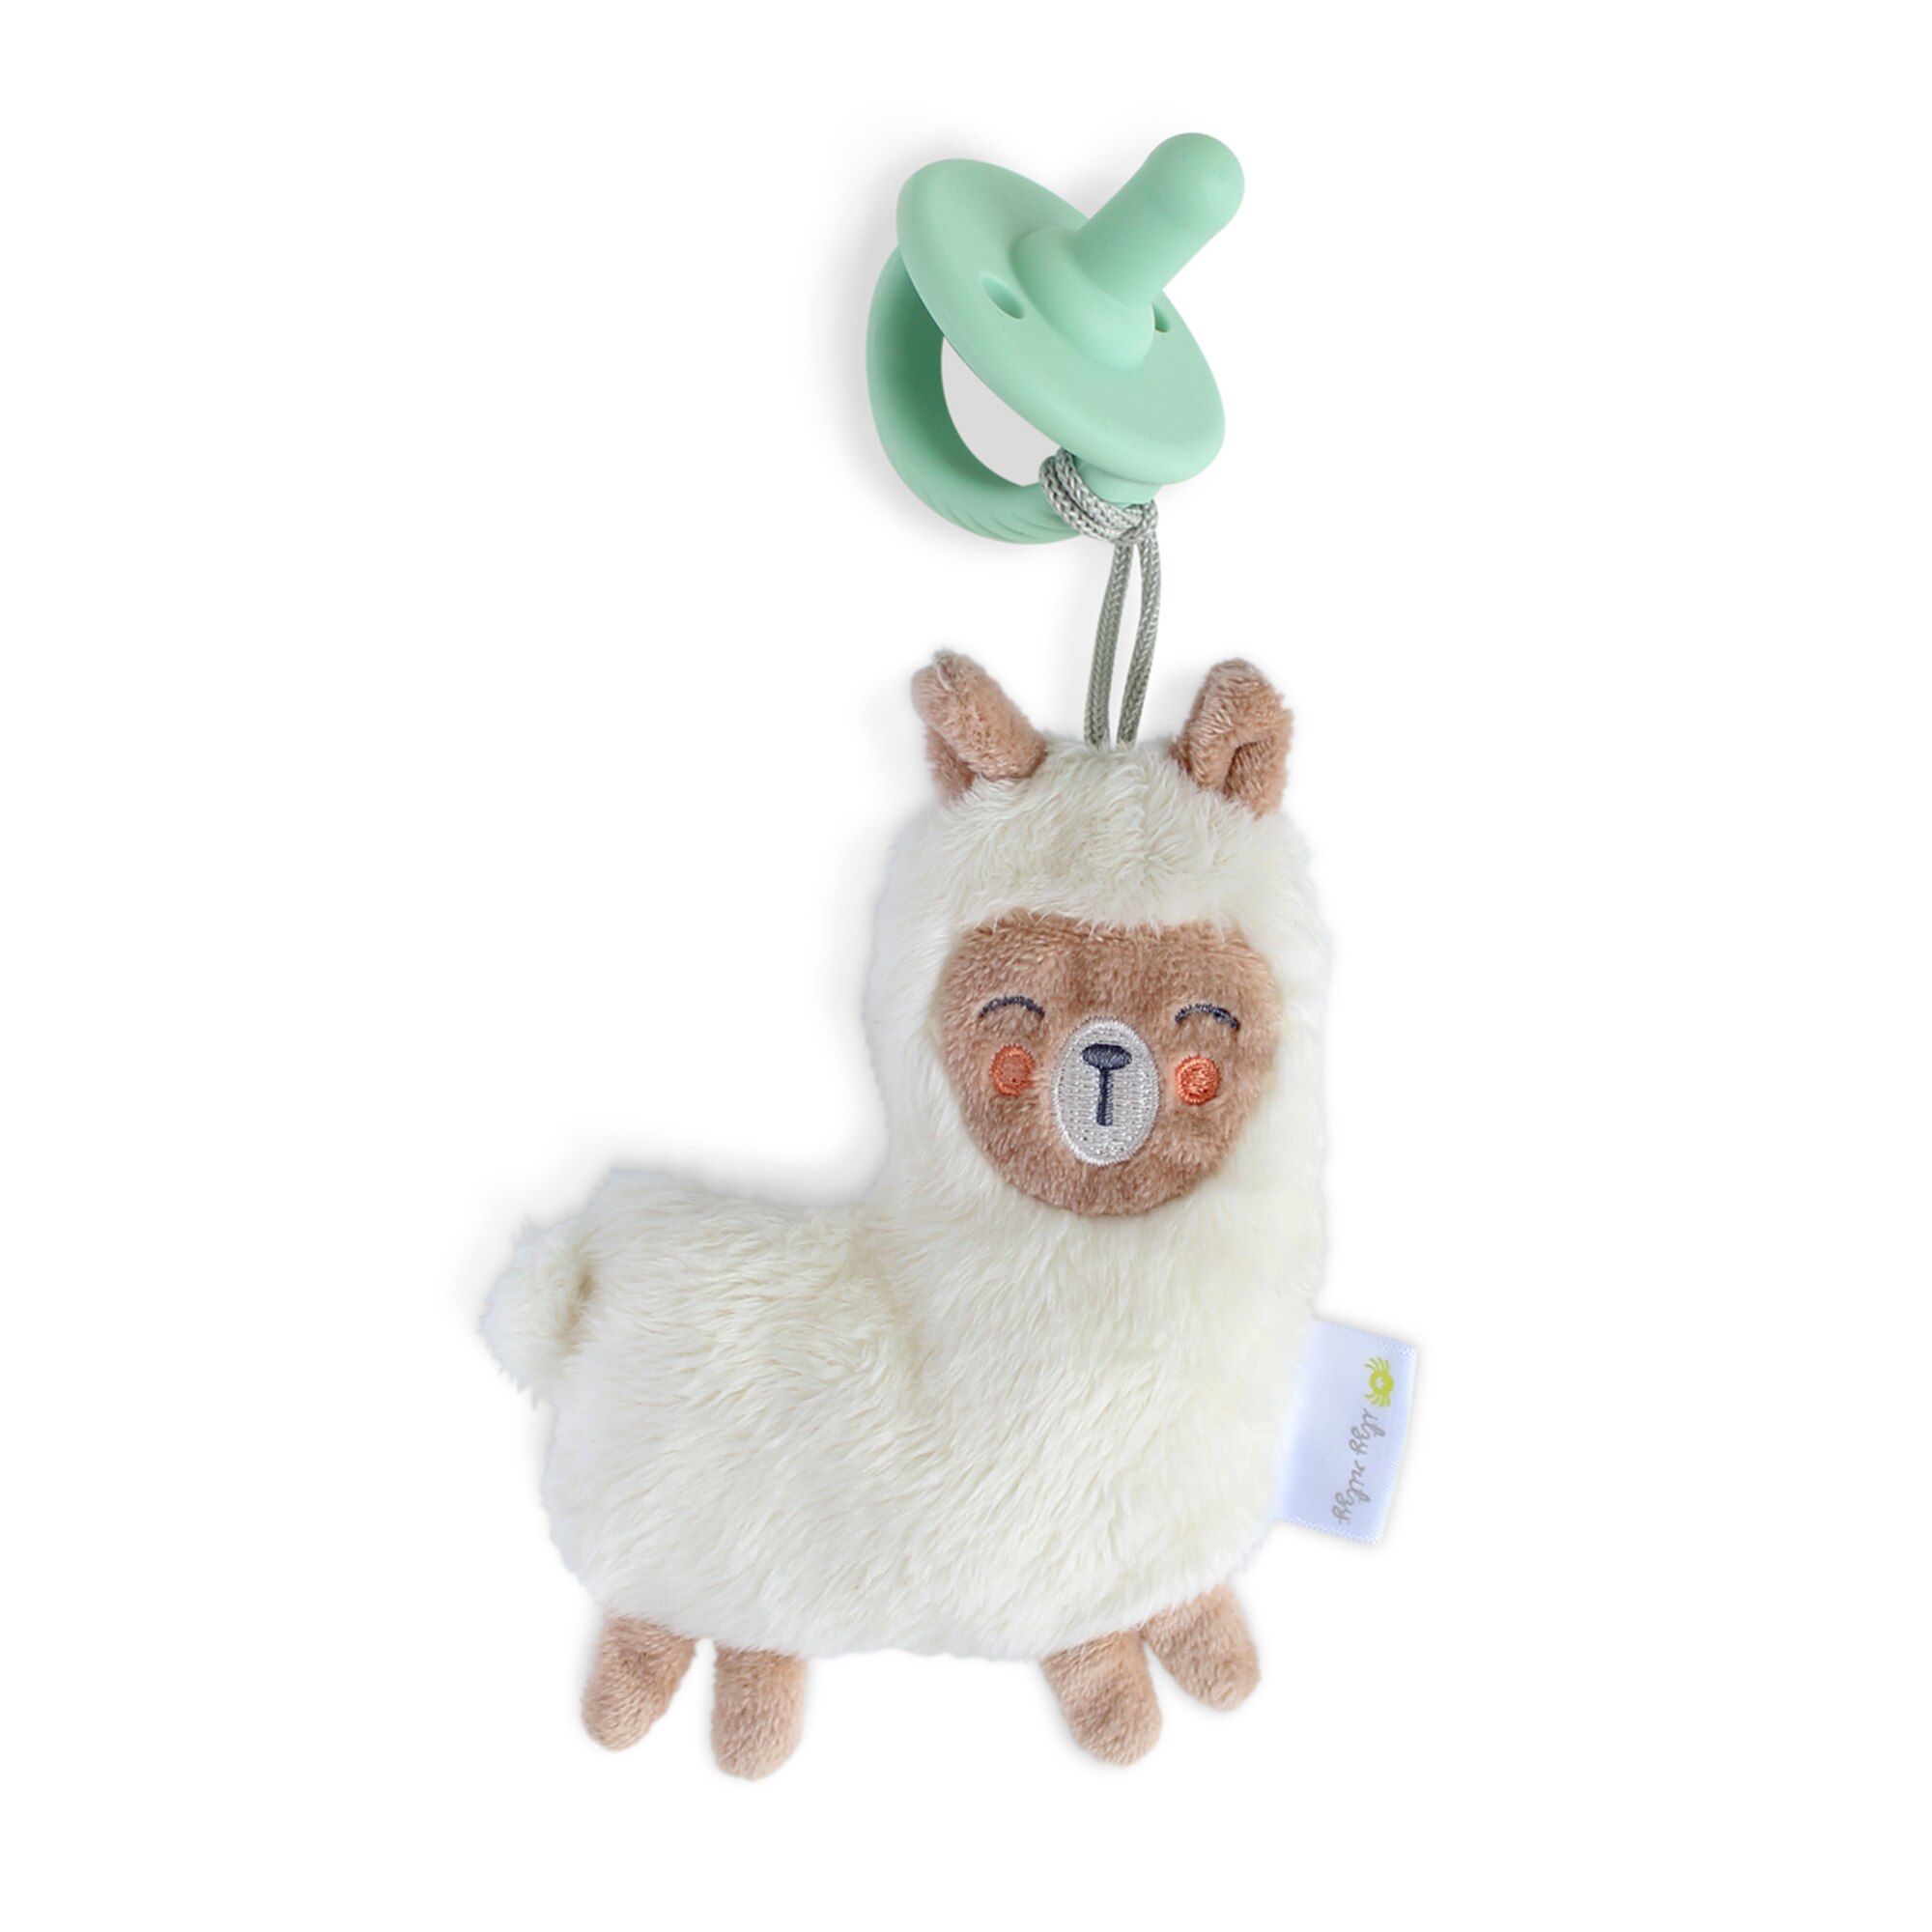 Sweetie Pals Silicone Pacifier & Plush Pal, Llama with Mint Pacifier